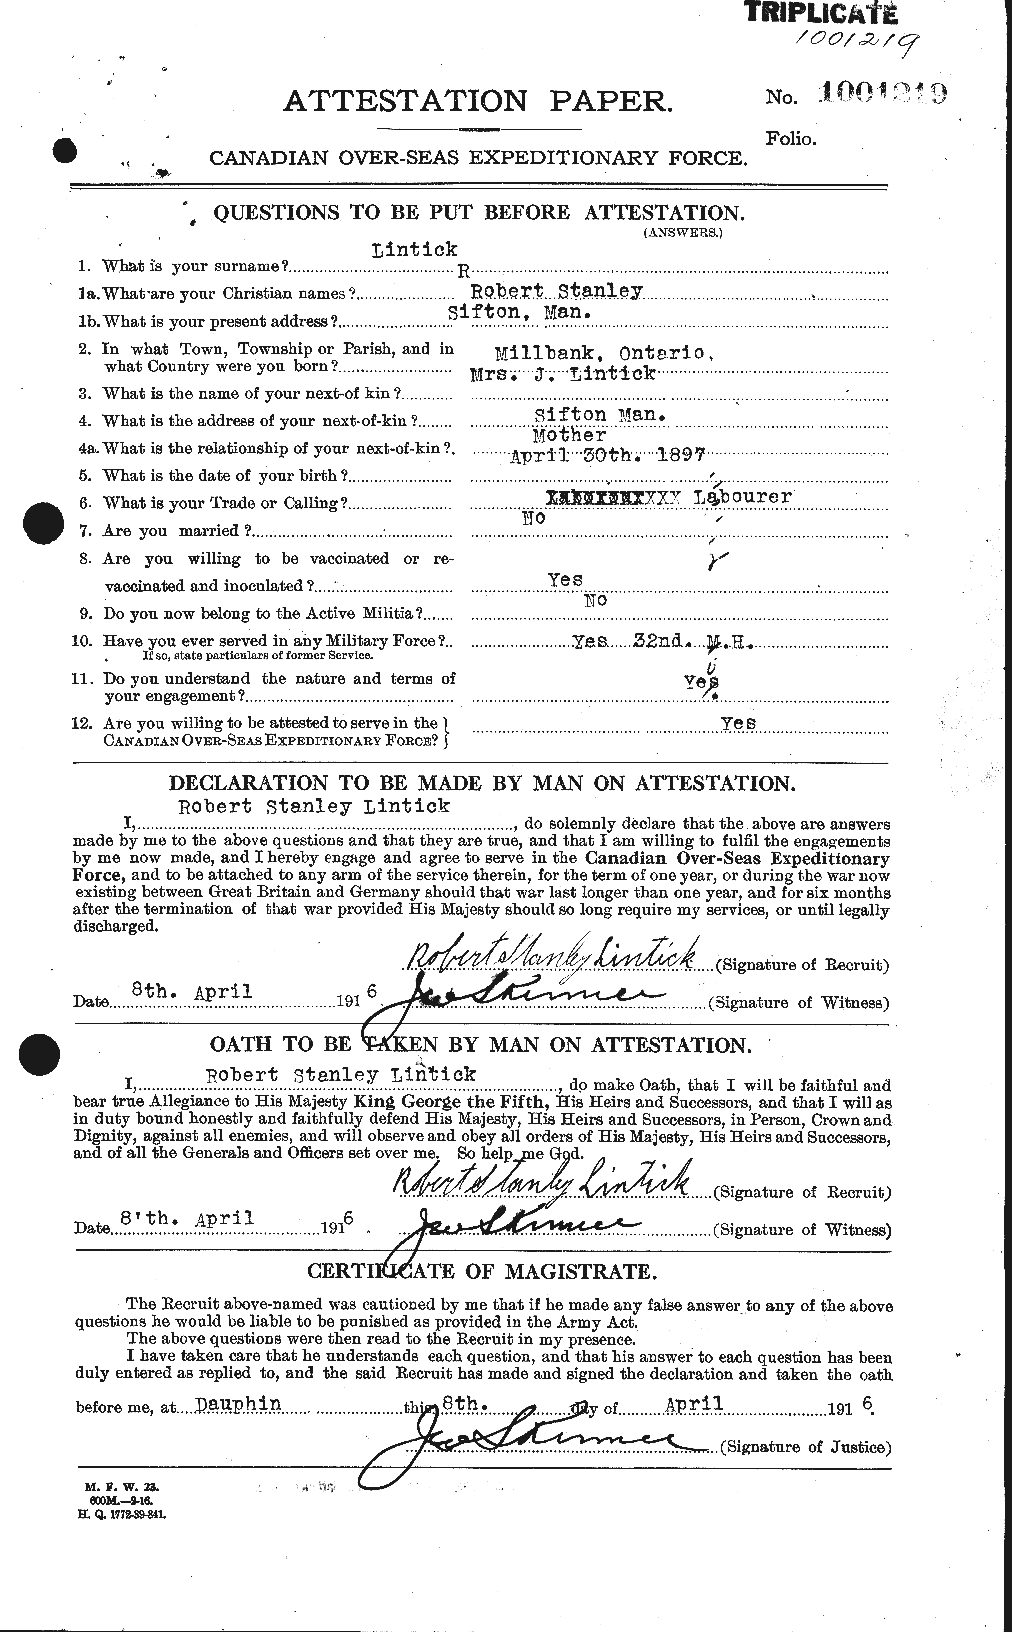 Personnel Records of the First World War - CEF 468712a